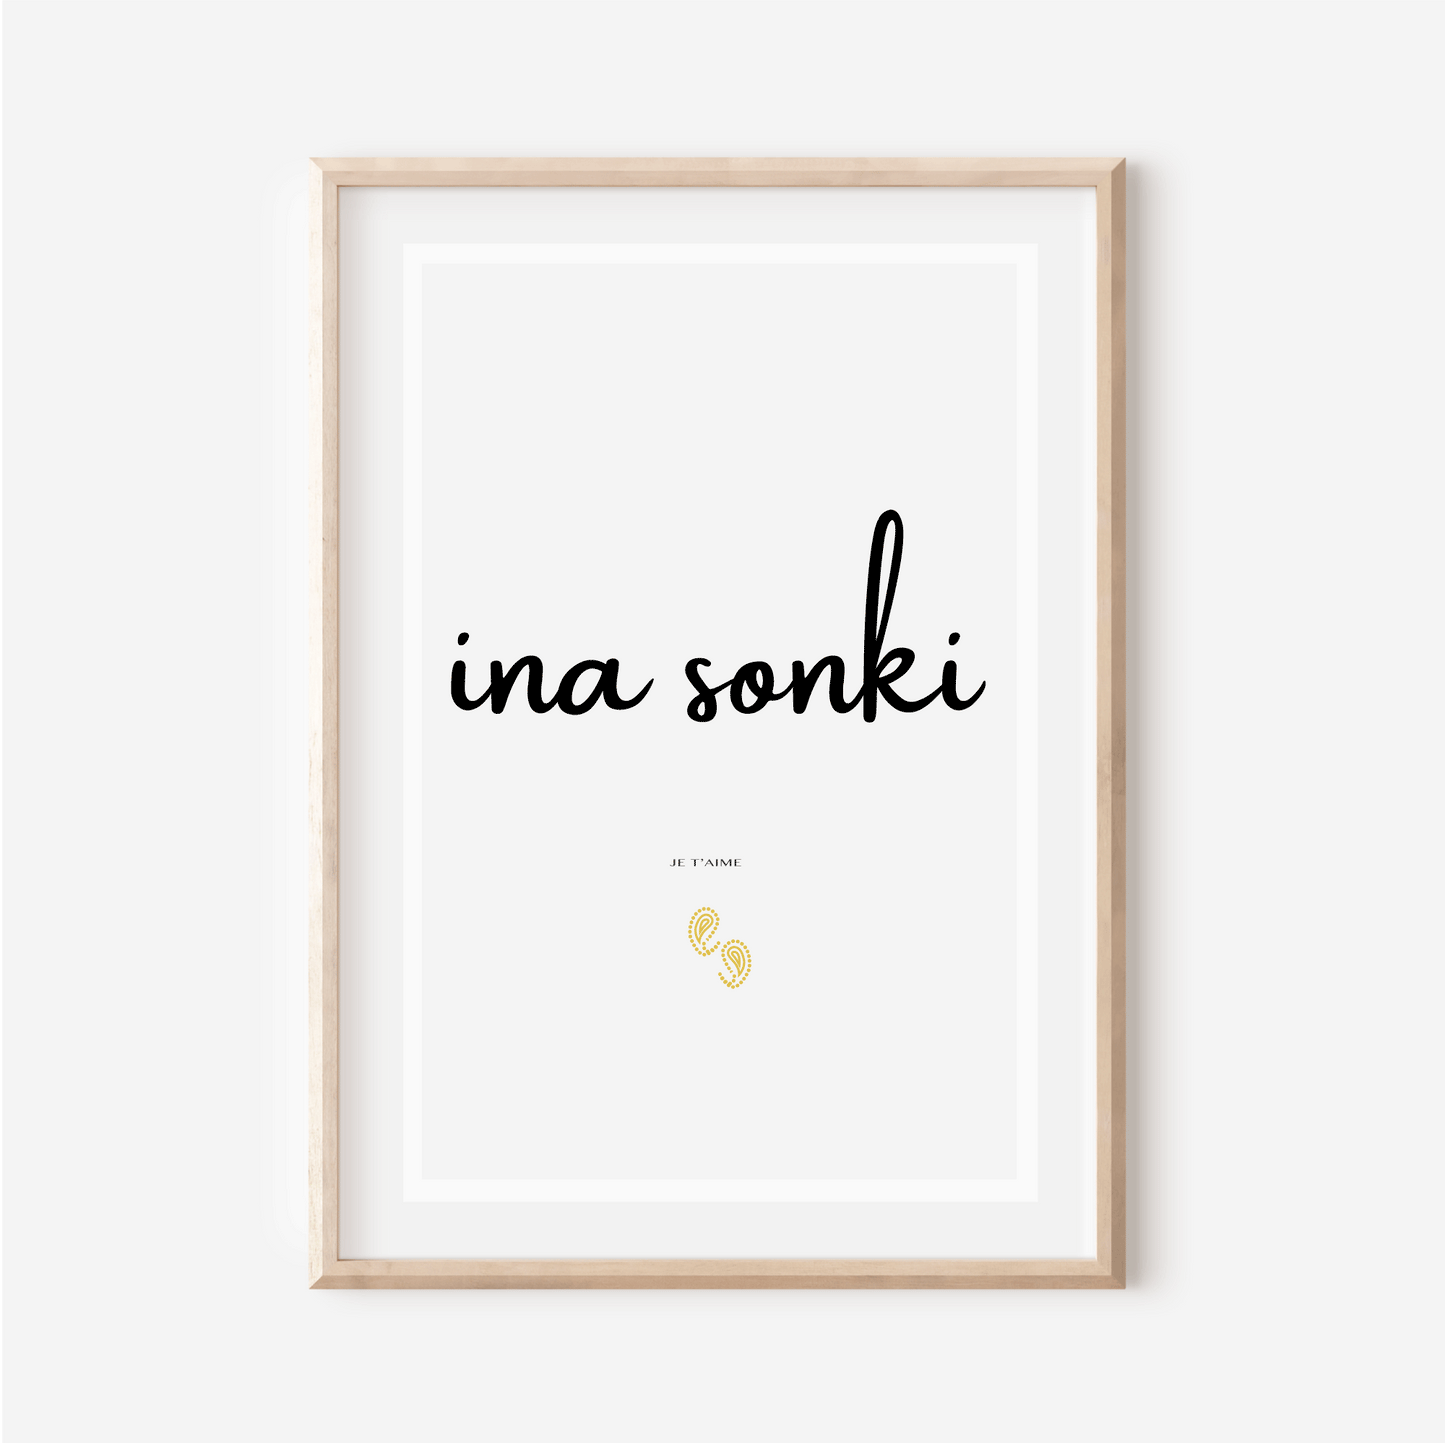 "I love you" in Hausa - "Ina Sonki" - Addressed to a woman